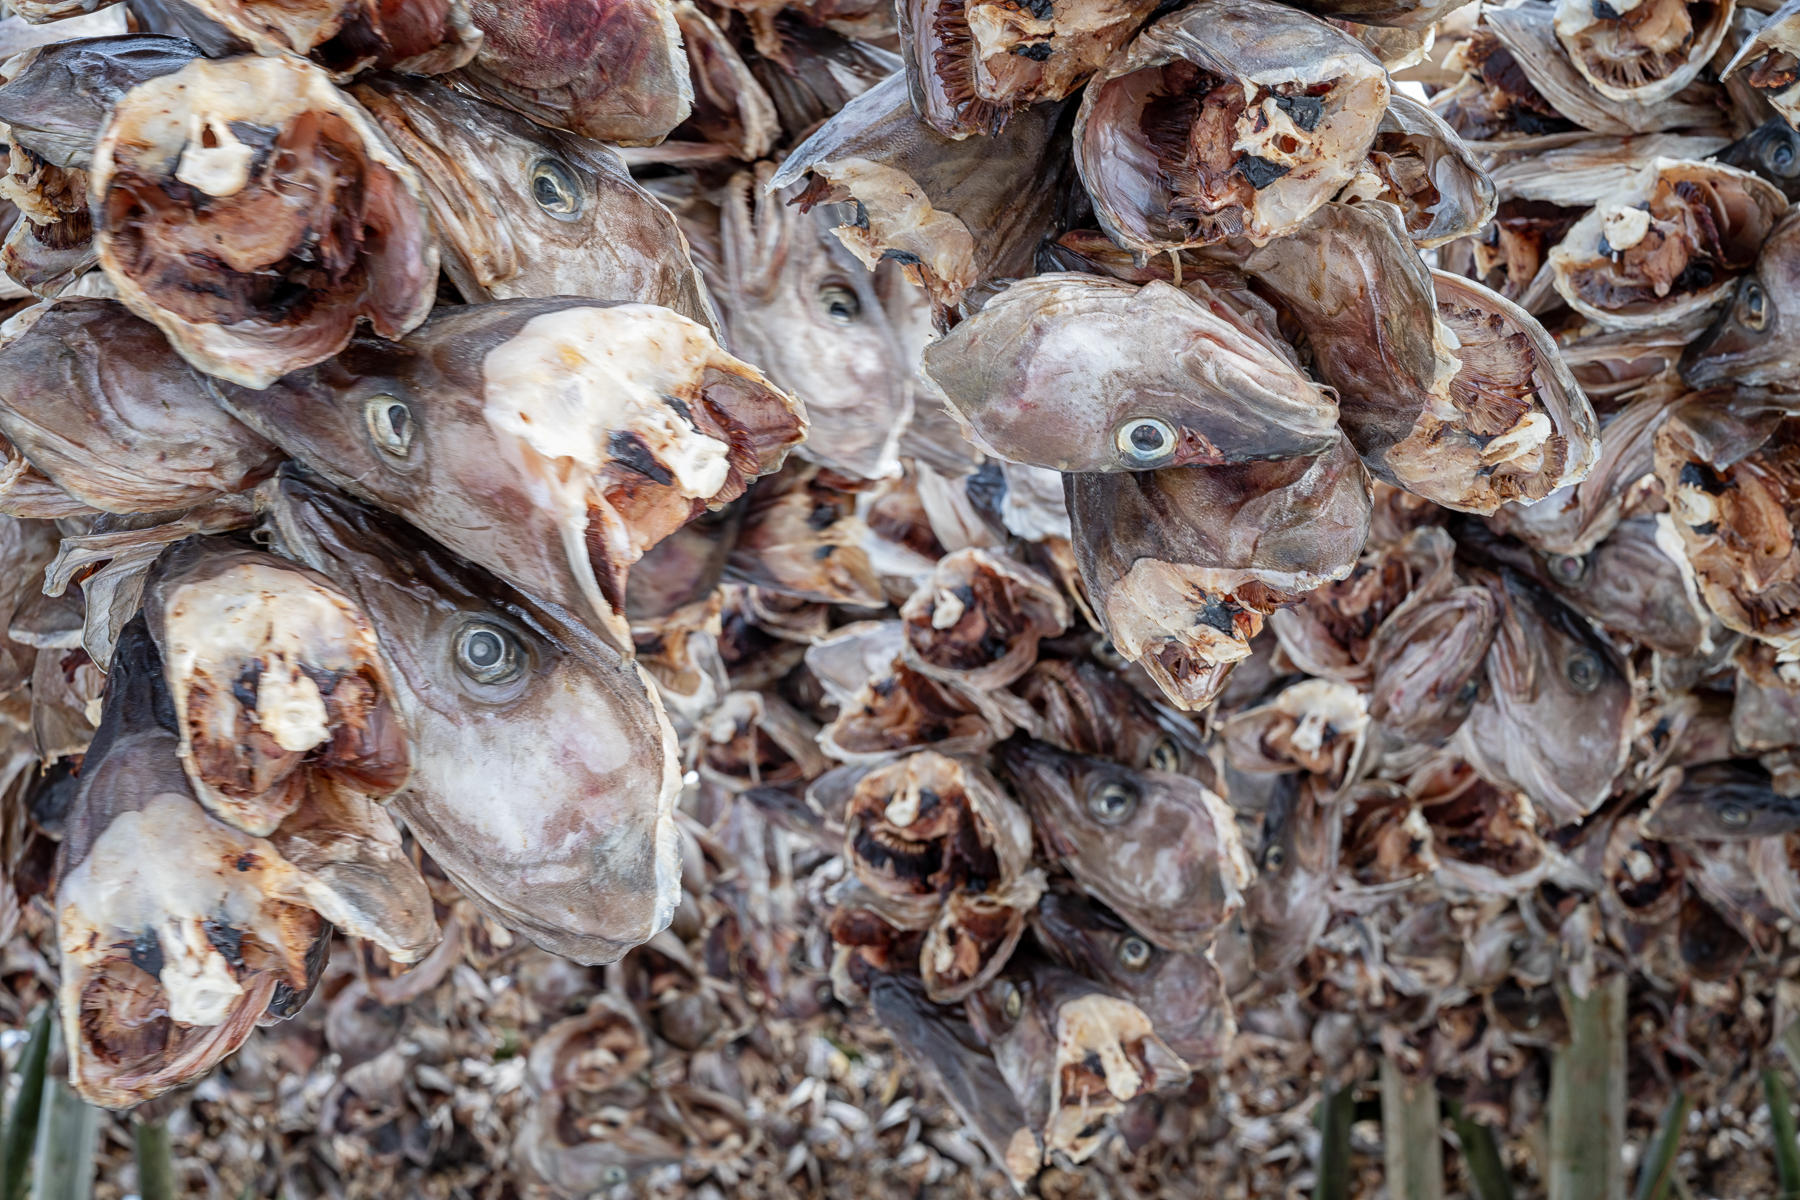 Cod heads out to dry. : Norway, Lofoten, Land of Cod : ELIZABETH SANJUAN PHOTOGRAPHY